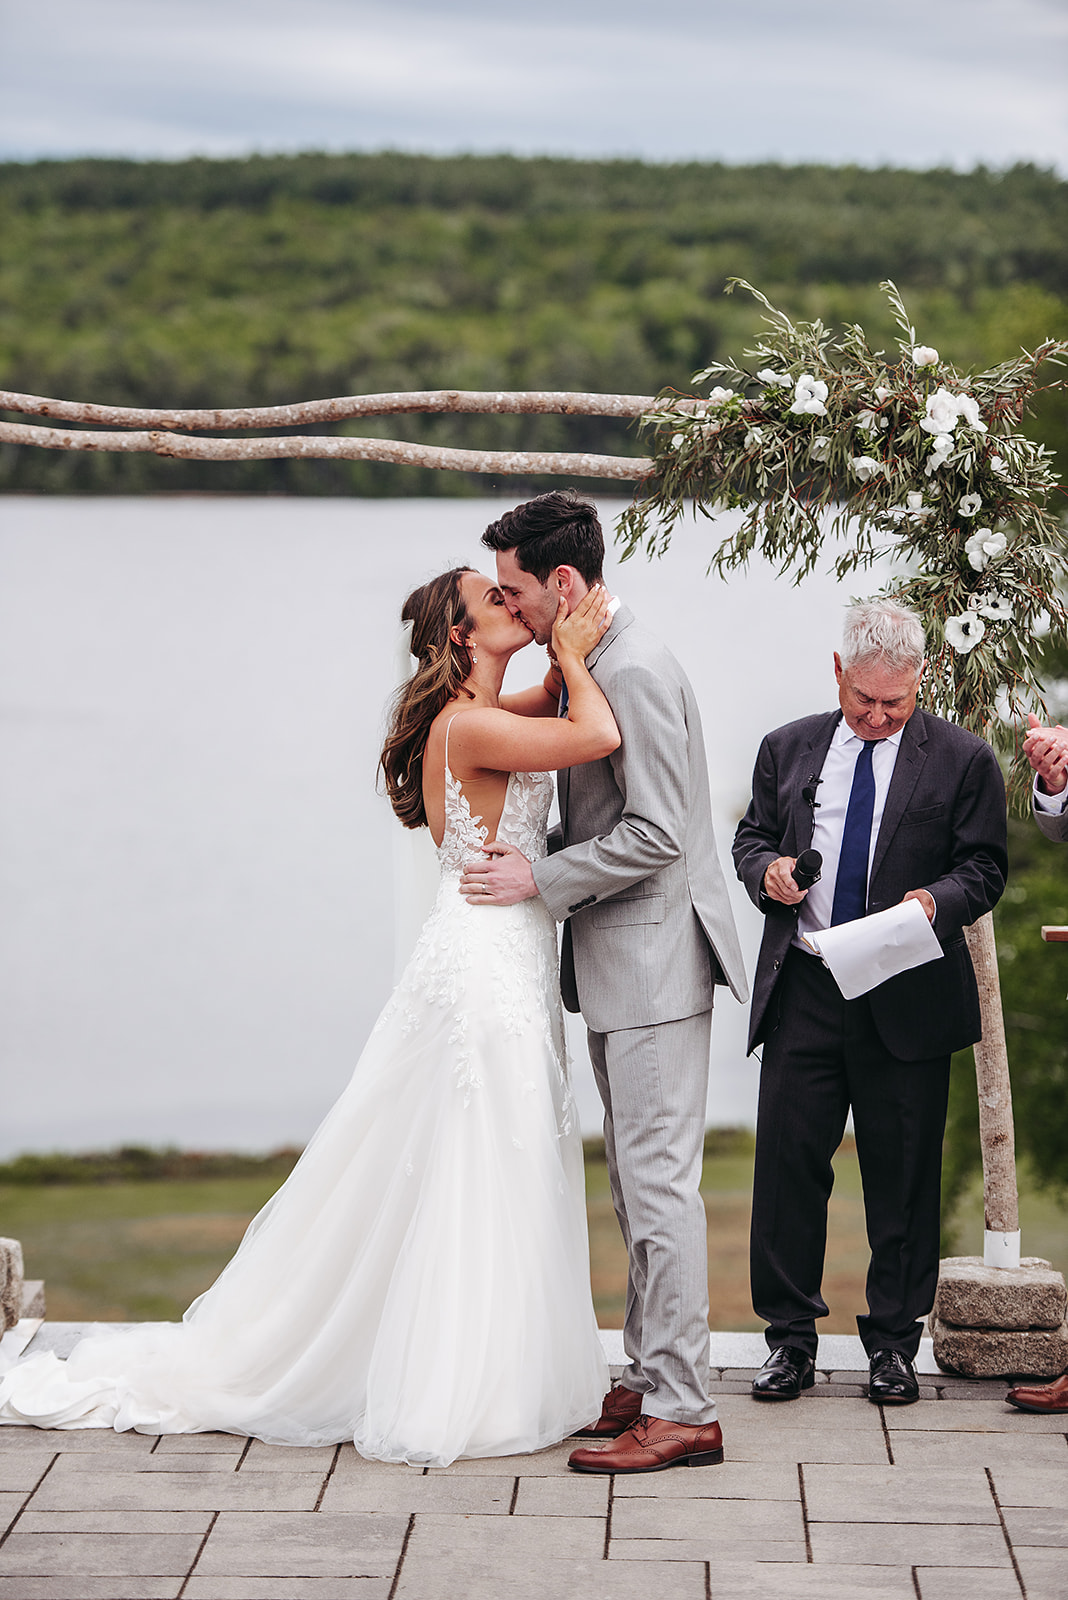 A beautiful wedding at Bear Mountain Inn located in Waterford, Maine. The scenery was stunning, with a picturesque Bear 